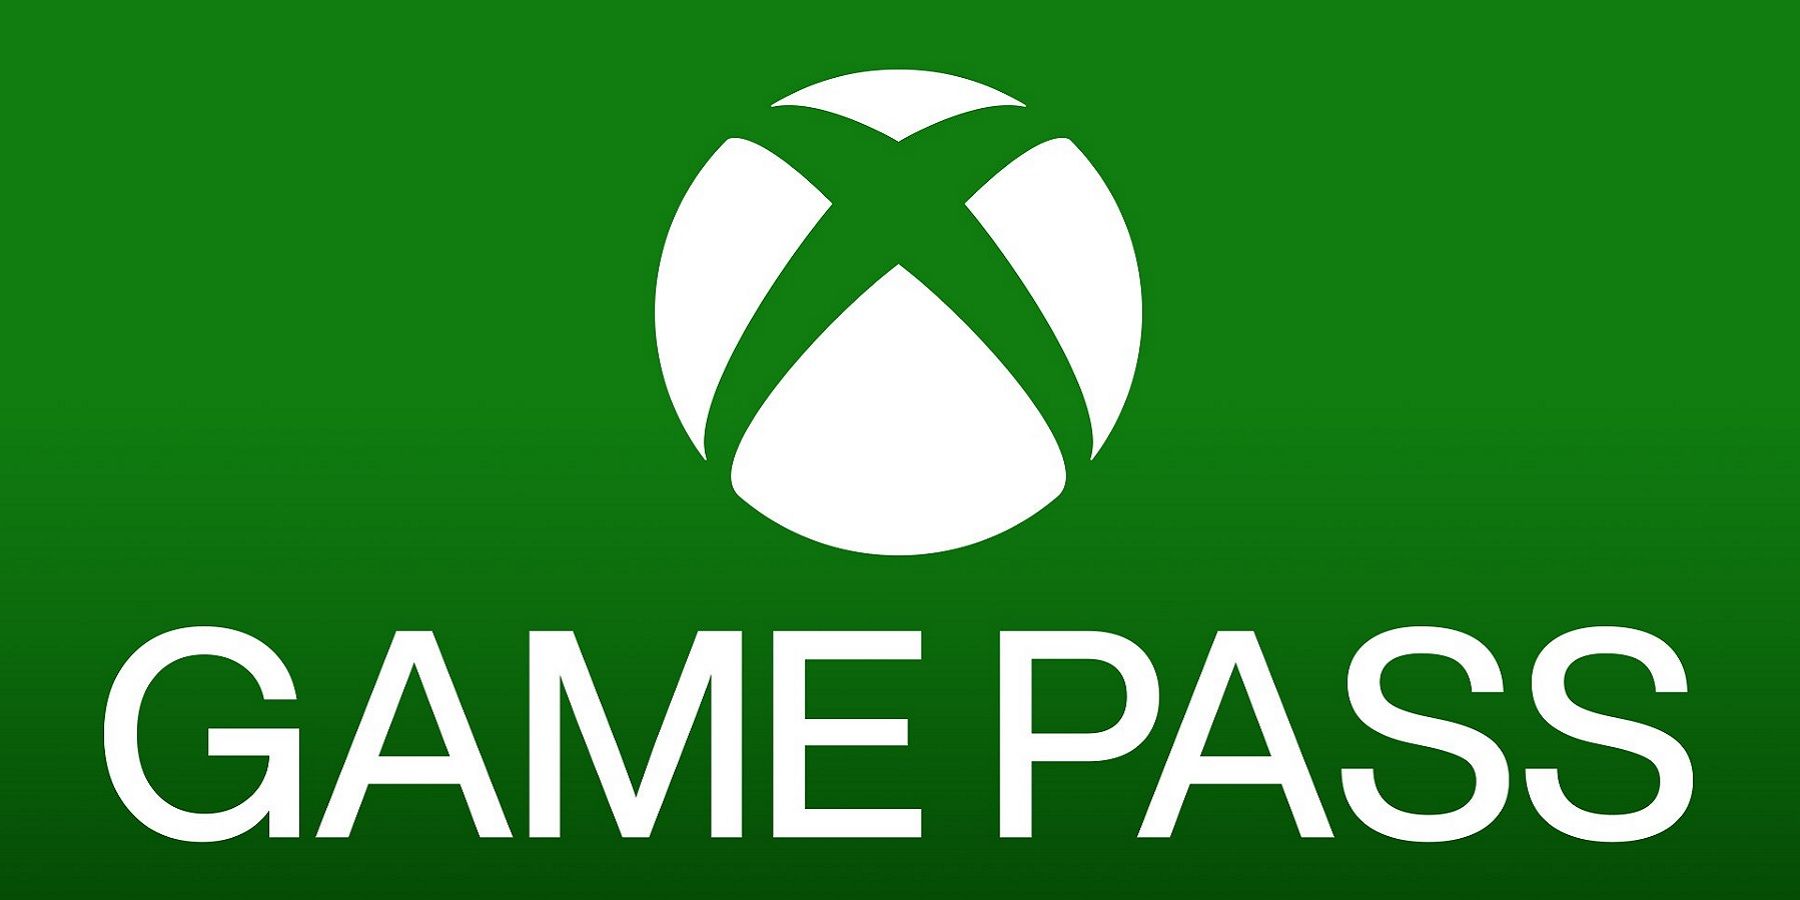 Xbox Game Pass Adds 2 New Games in Latest Update